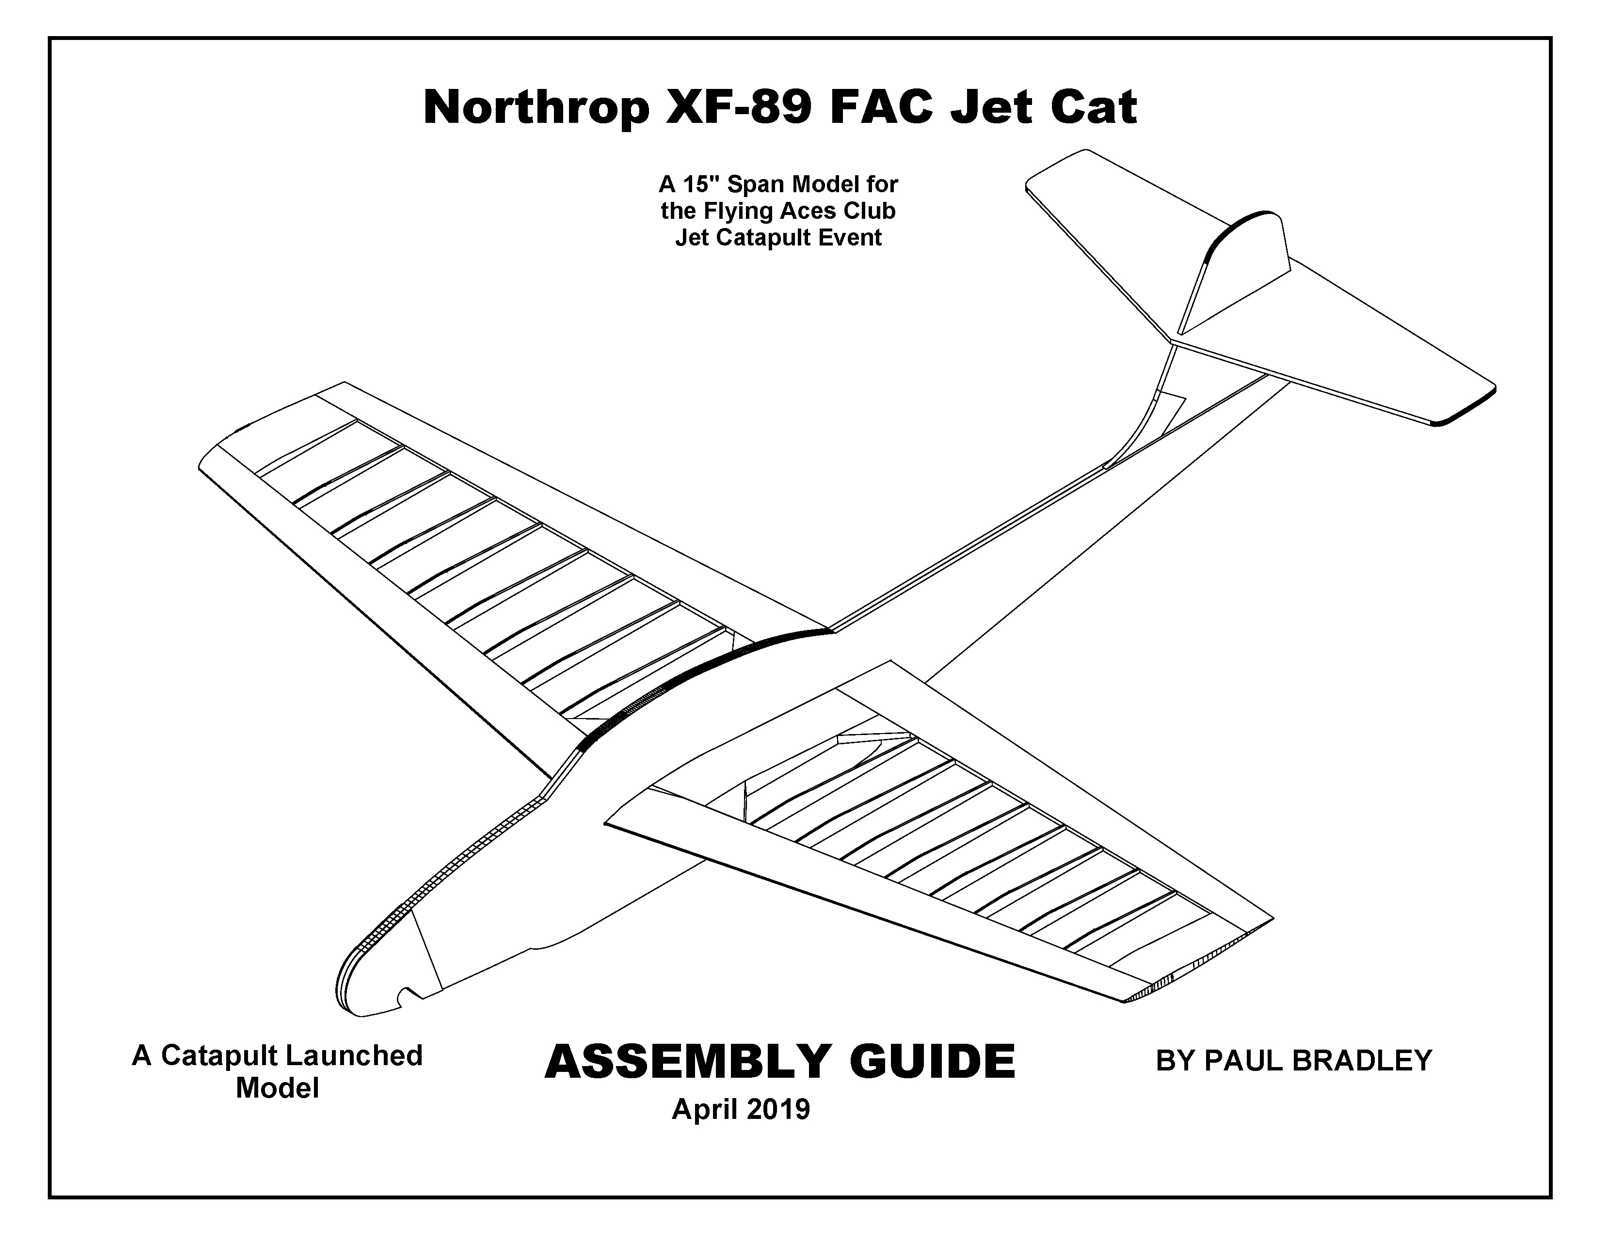 https://0201.nccdn.net/1_2/000/000/12c/970/Pages-from-Northrop-XF-89-Jet-Cat-Assembly-Guide-1600x1236.jpg